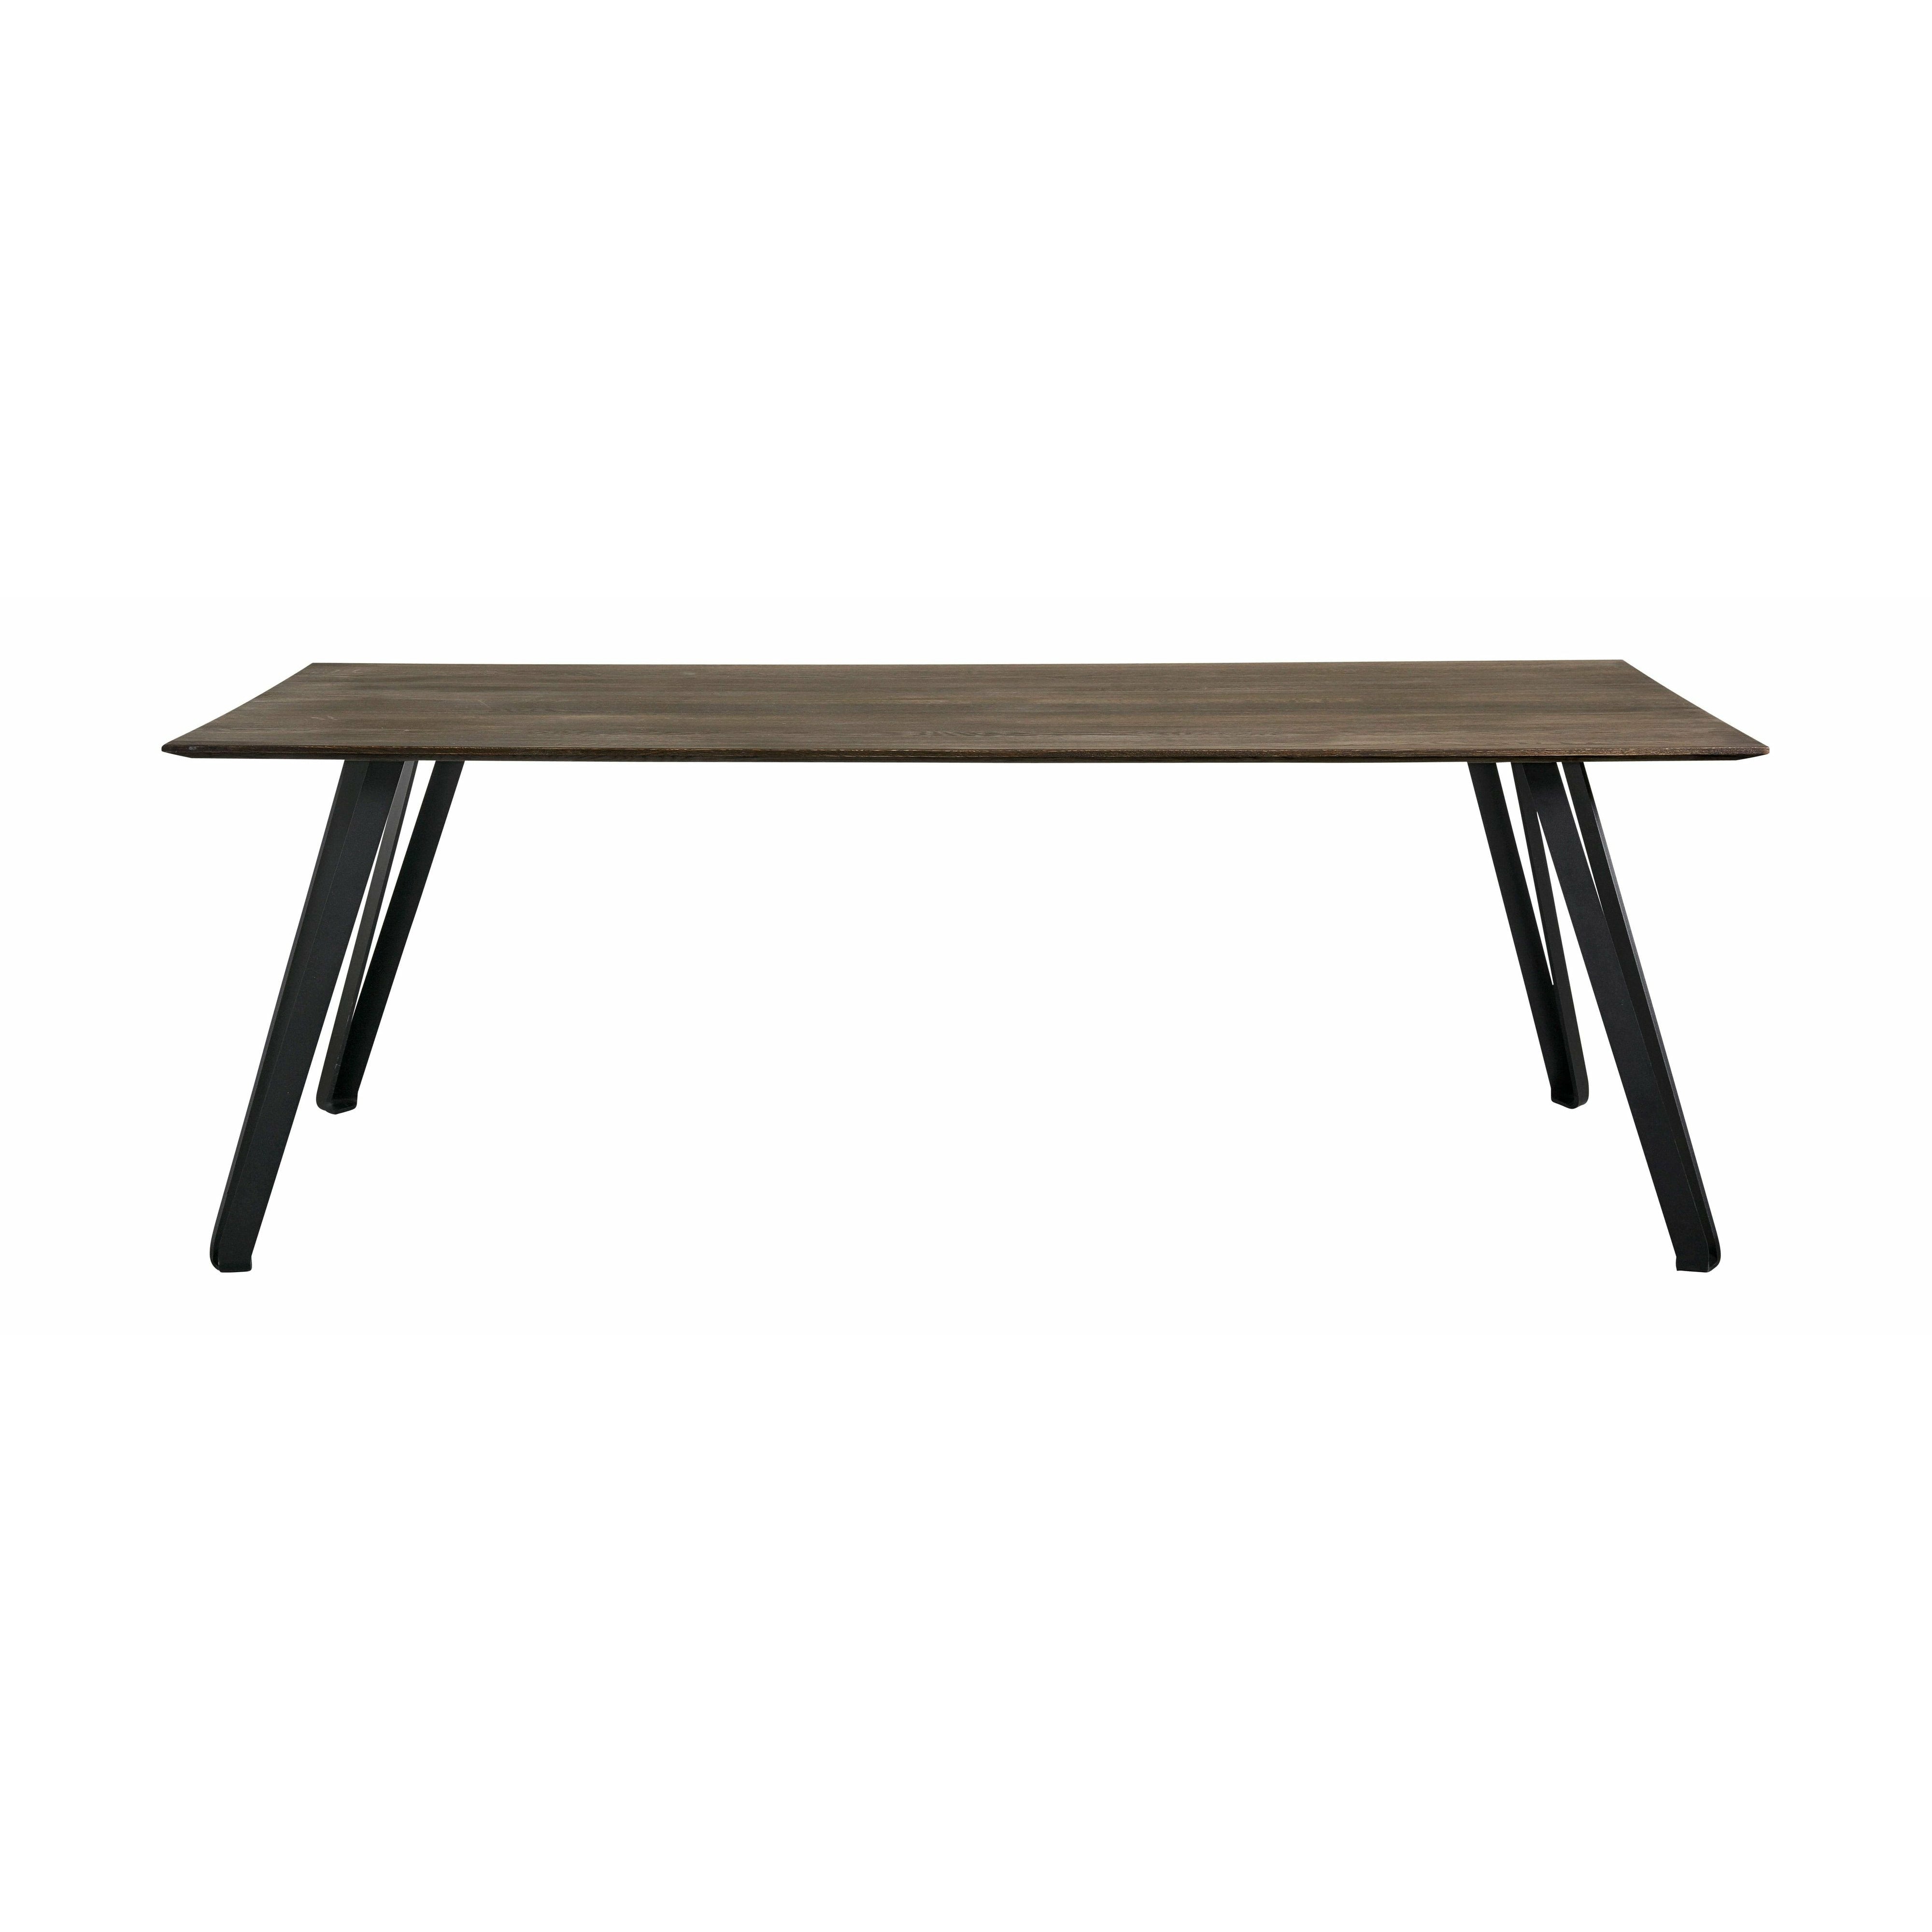 Muubs Space Dining Table Smoked Oak, 220cm